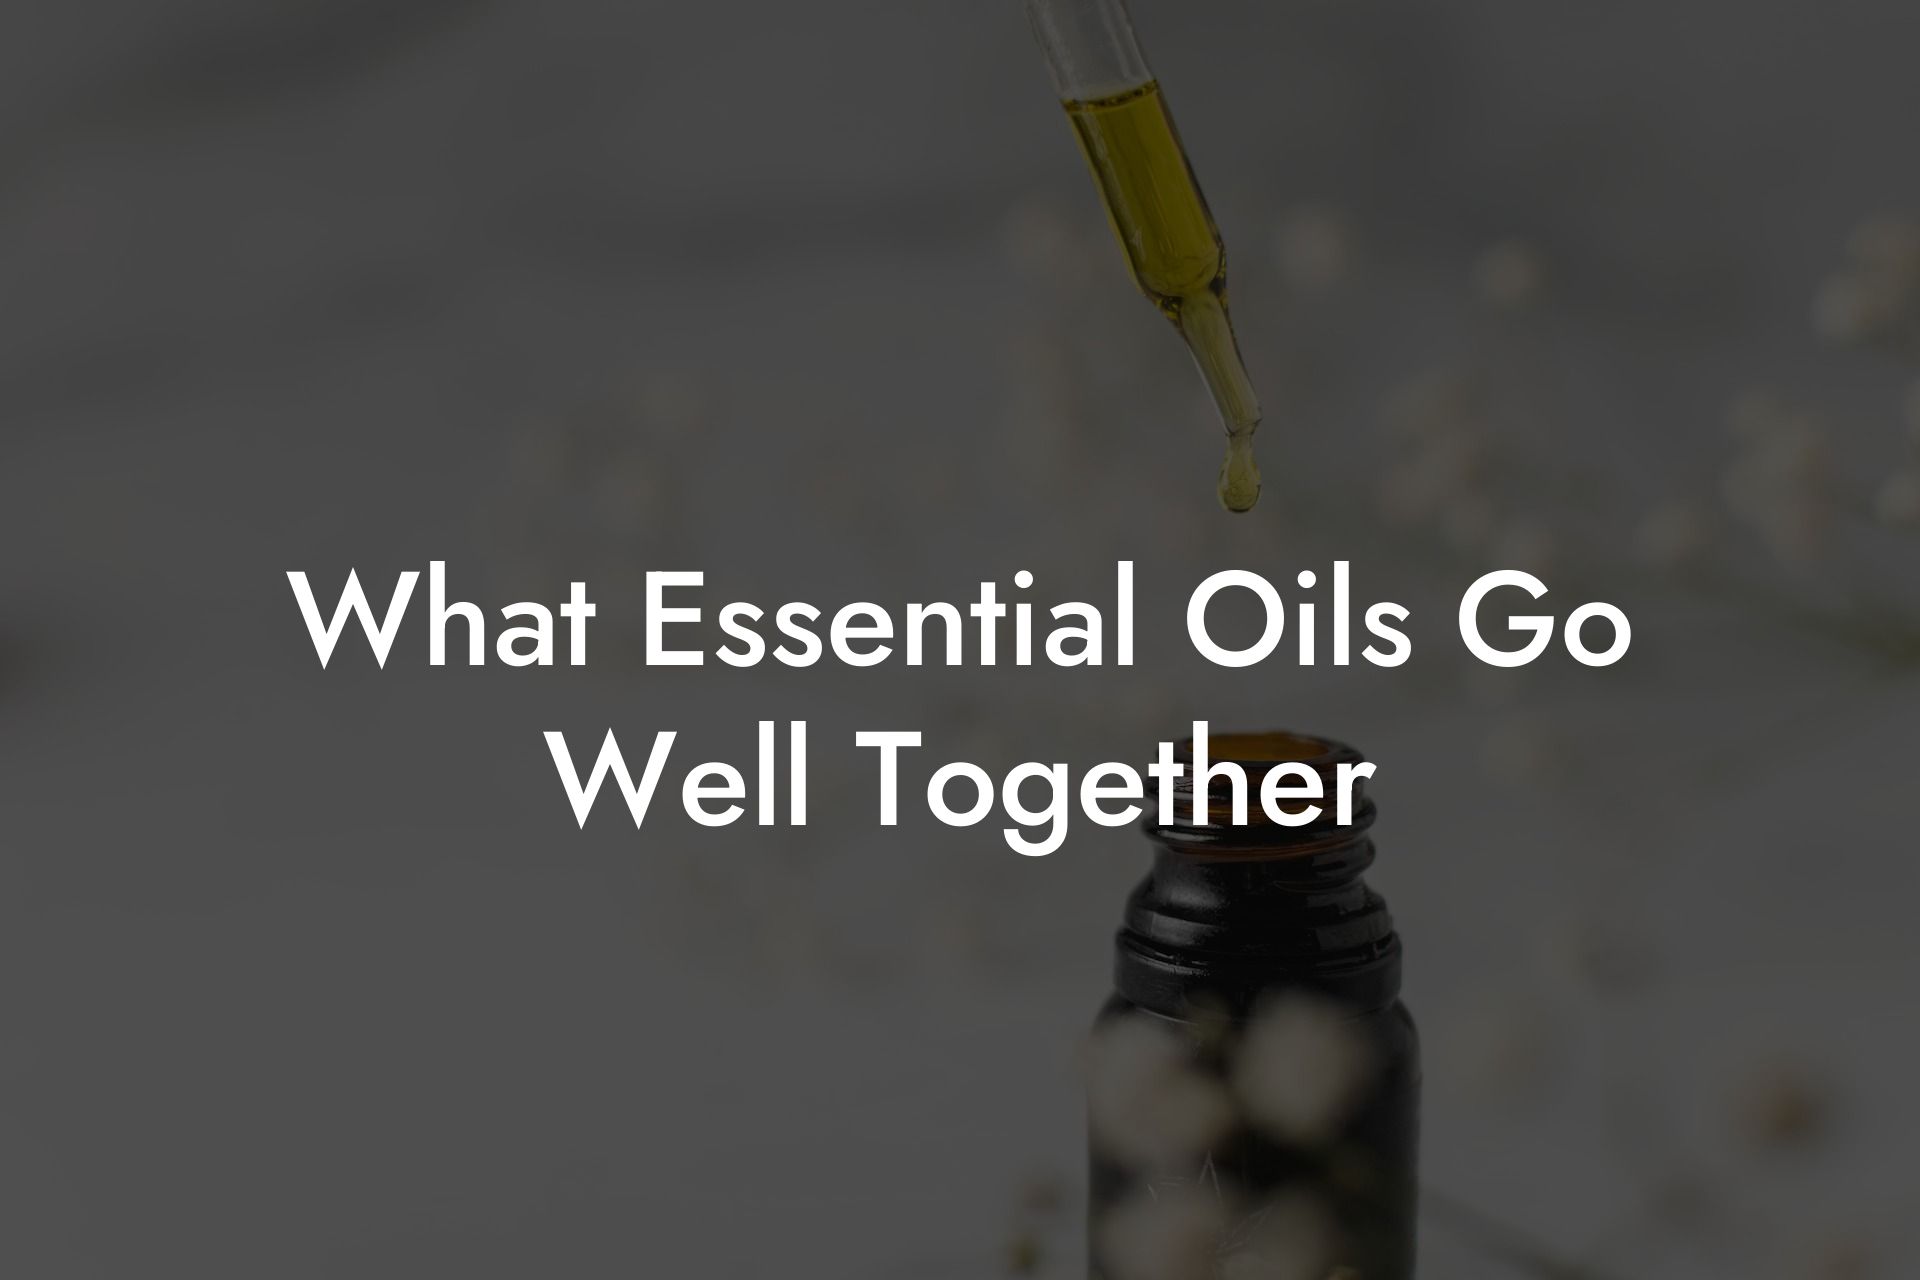 What Essential Oils Go Well Together